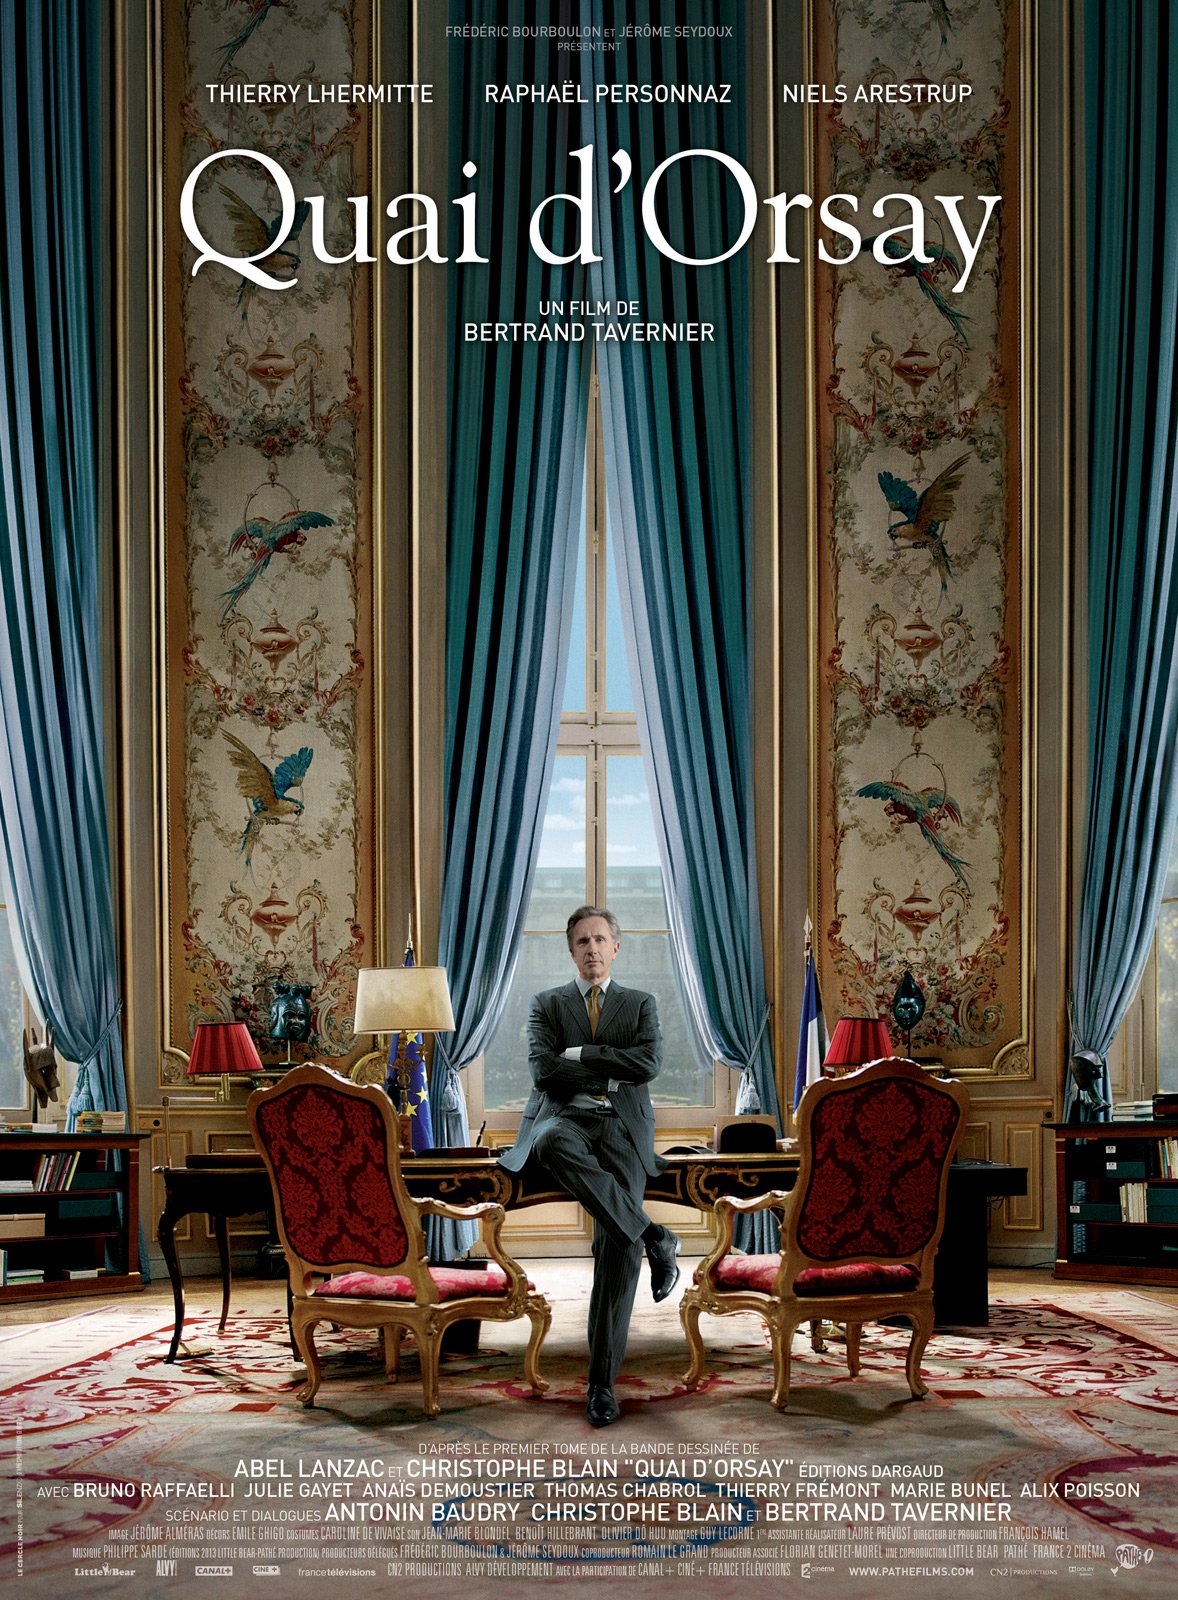 Poster of the movie The French Minister